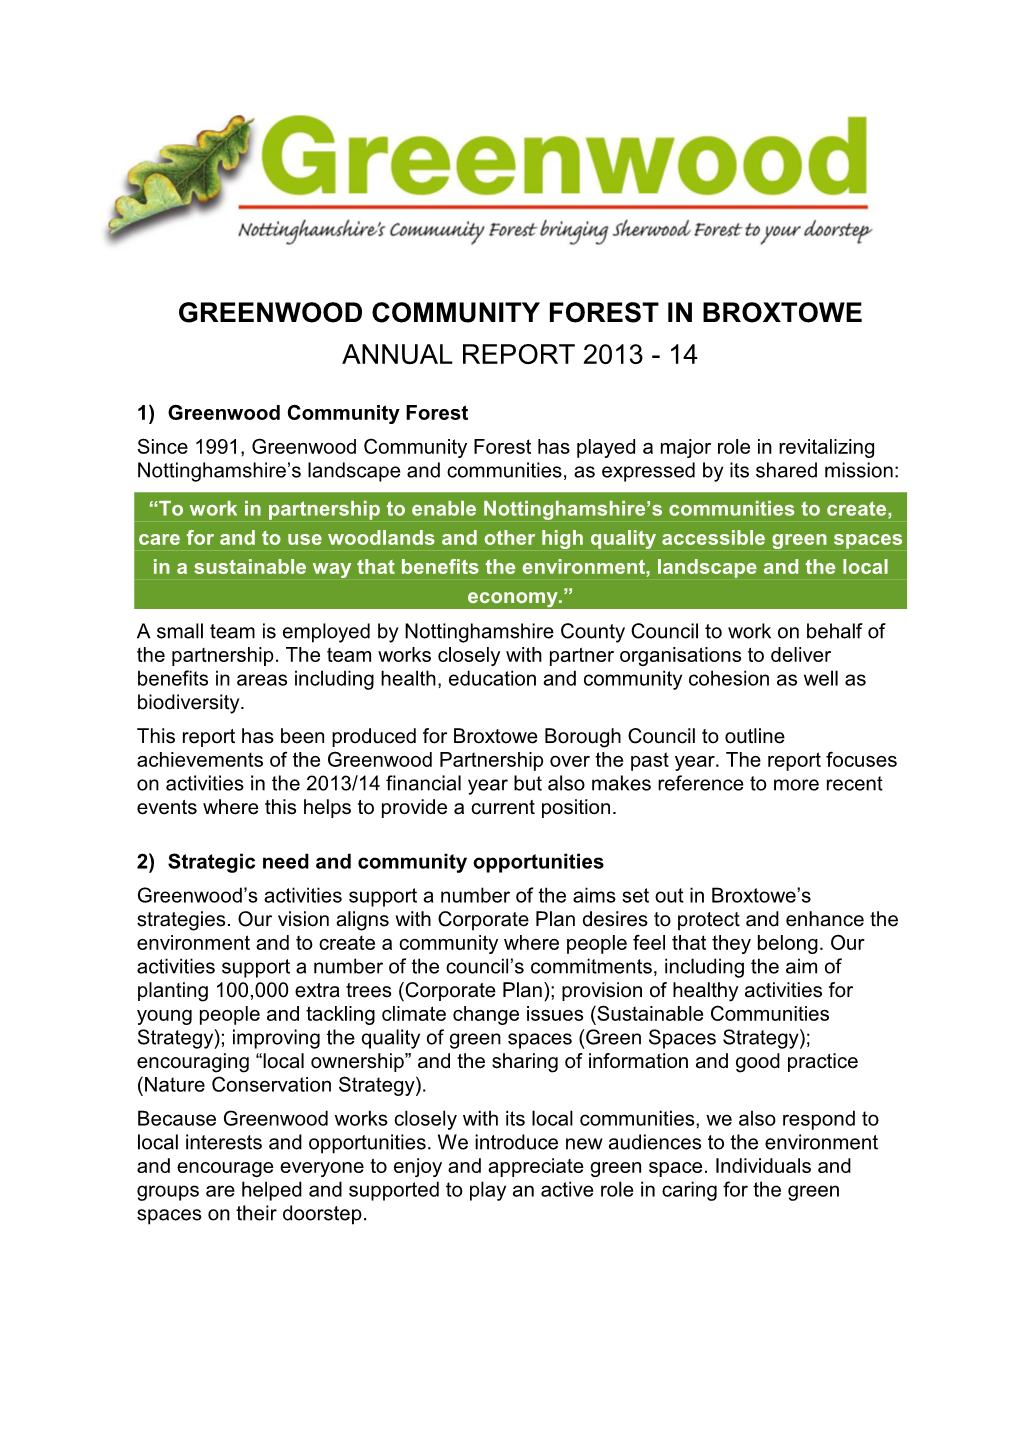 Greenwood Community Forest in Broxtowe Annual Report 2013 - 14